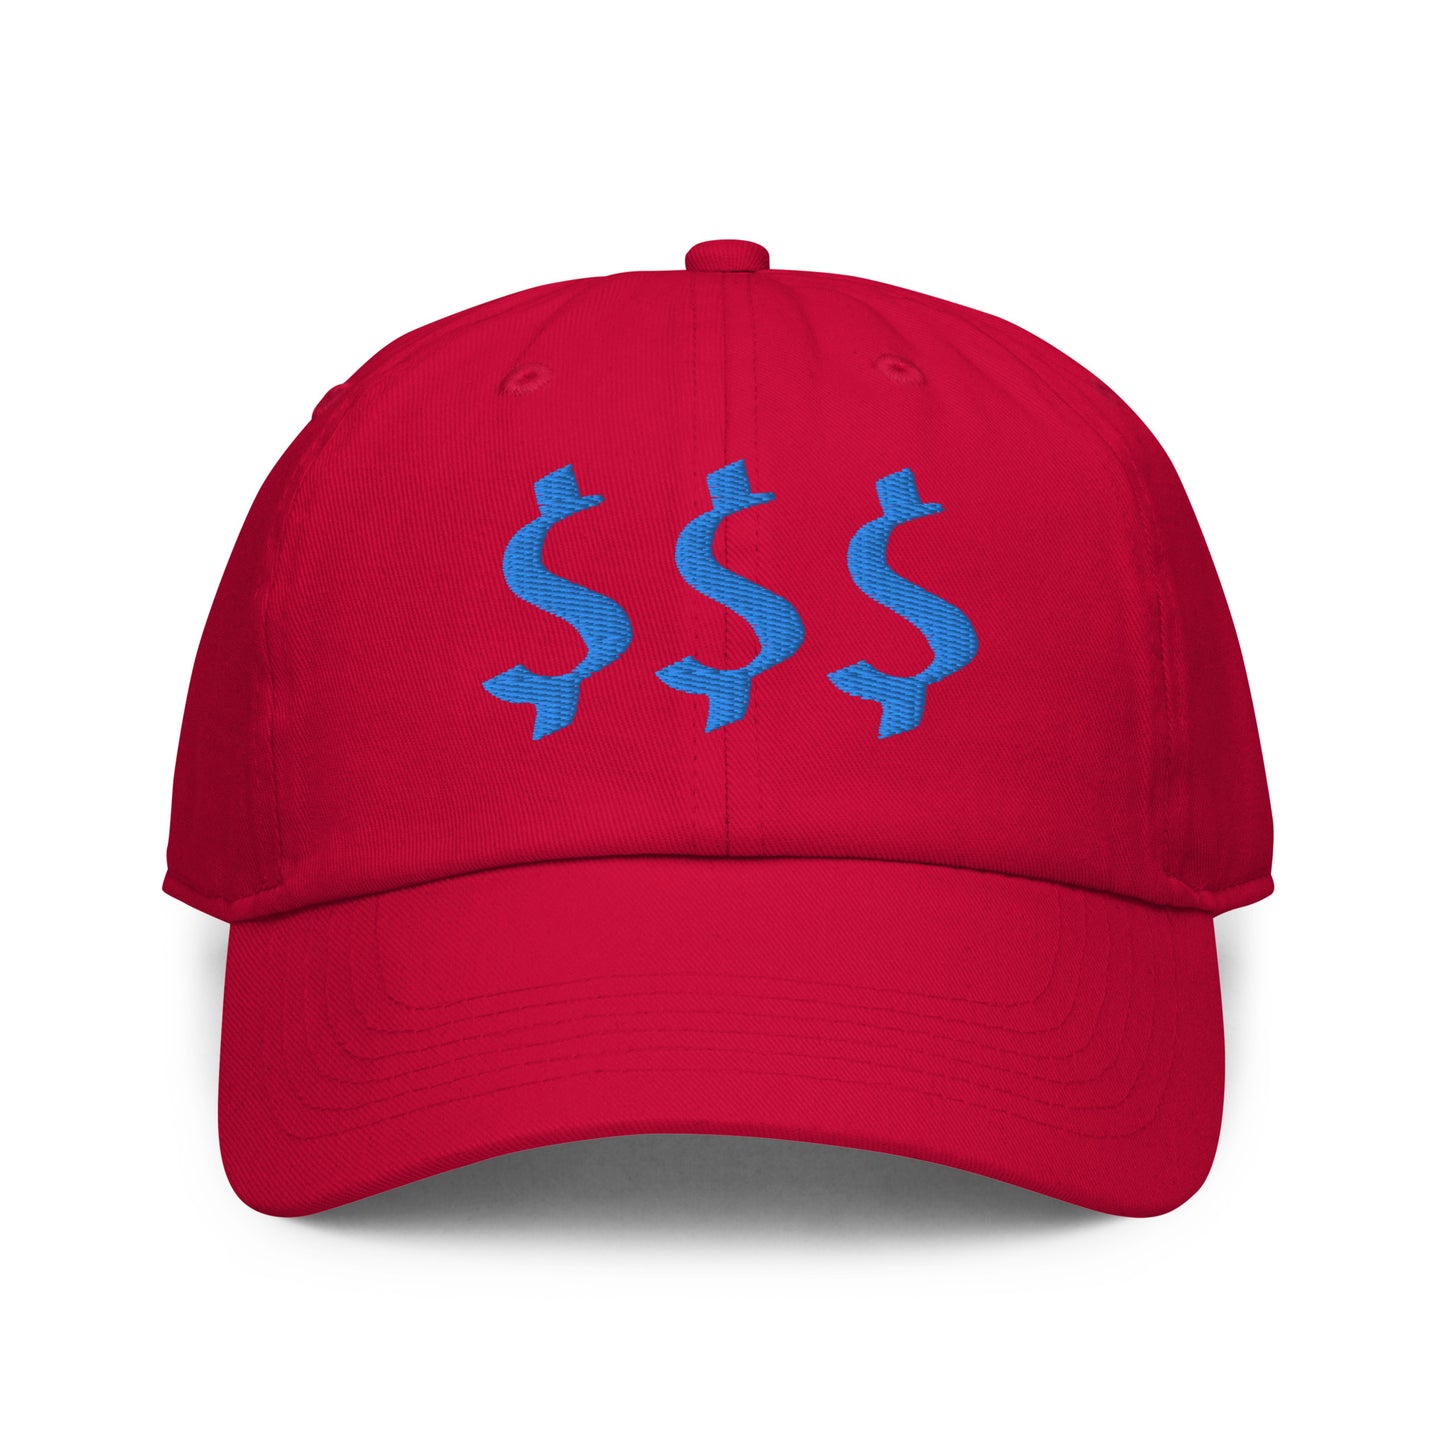 Blue Dollar Sign Fitted cap